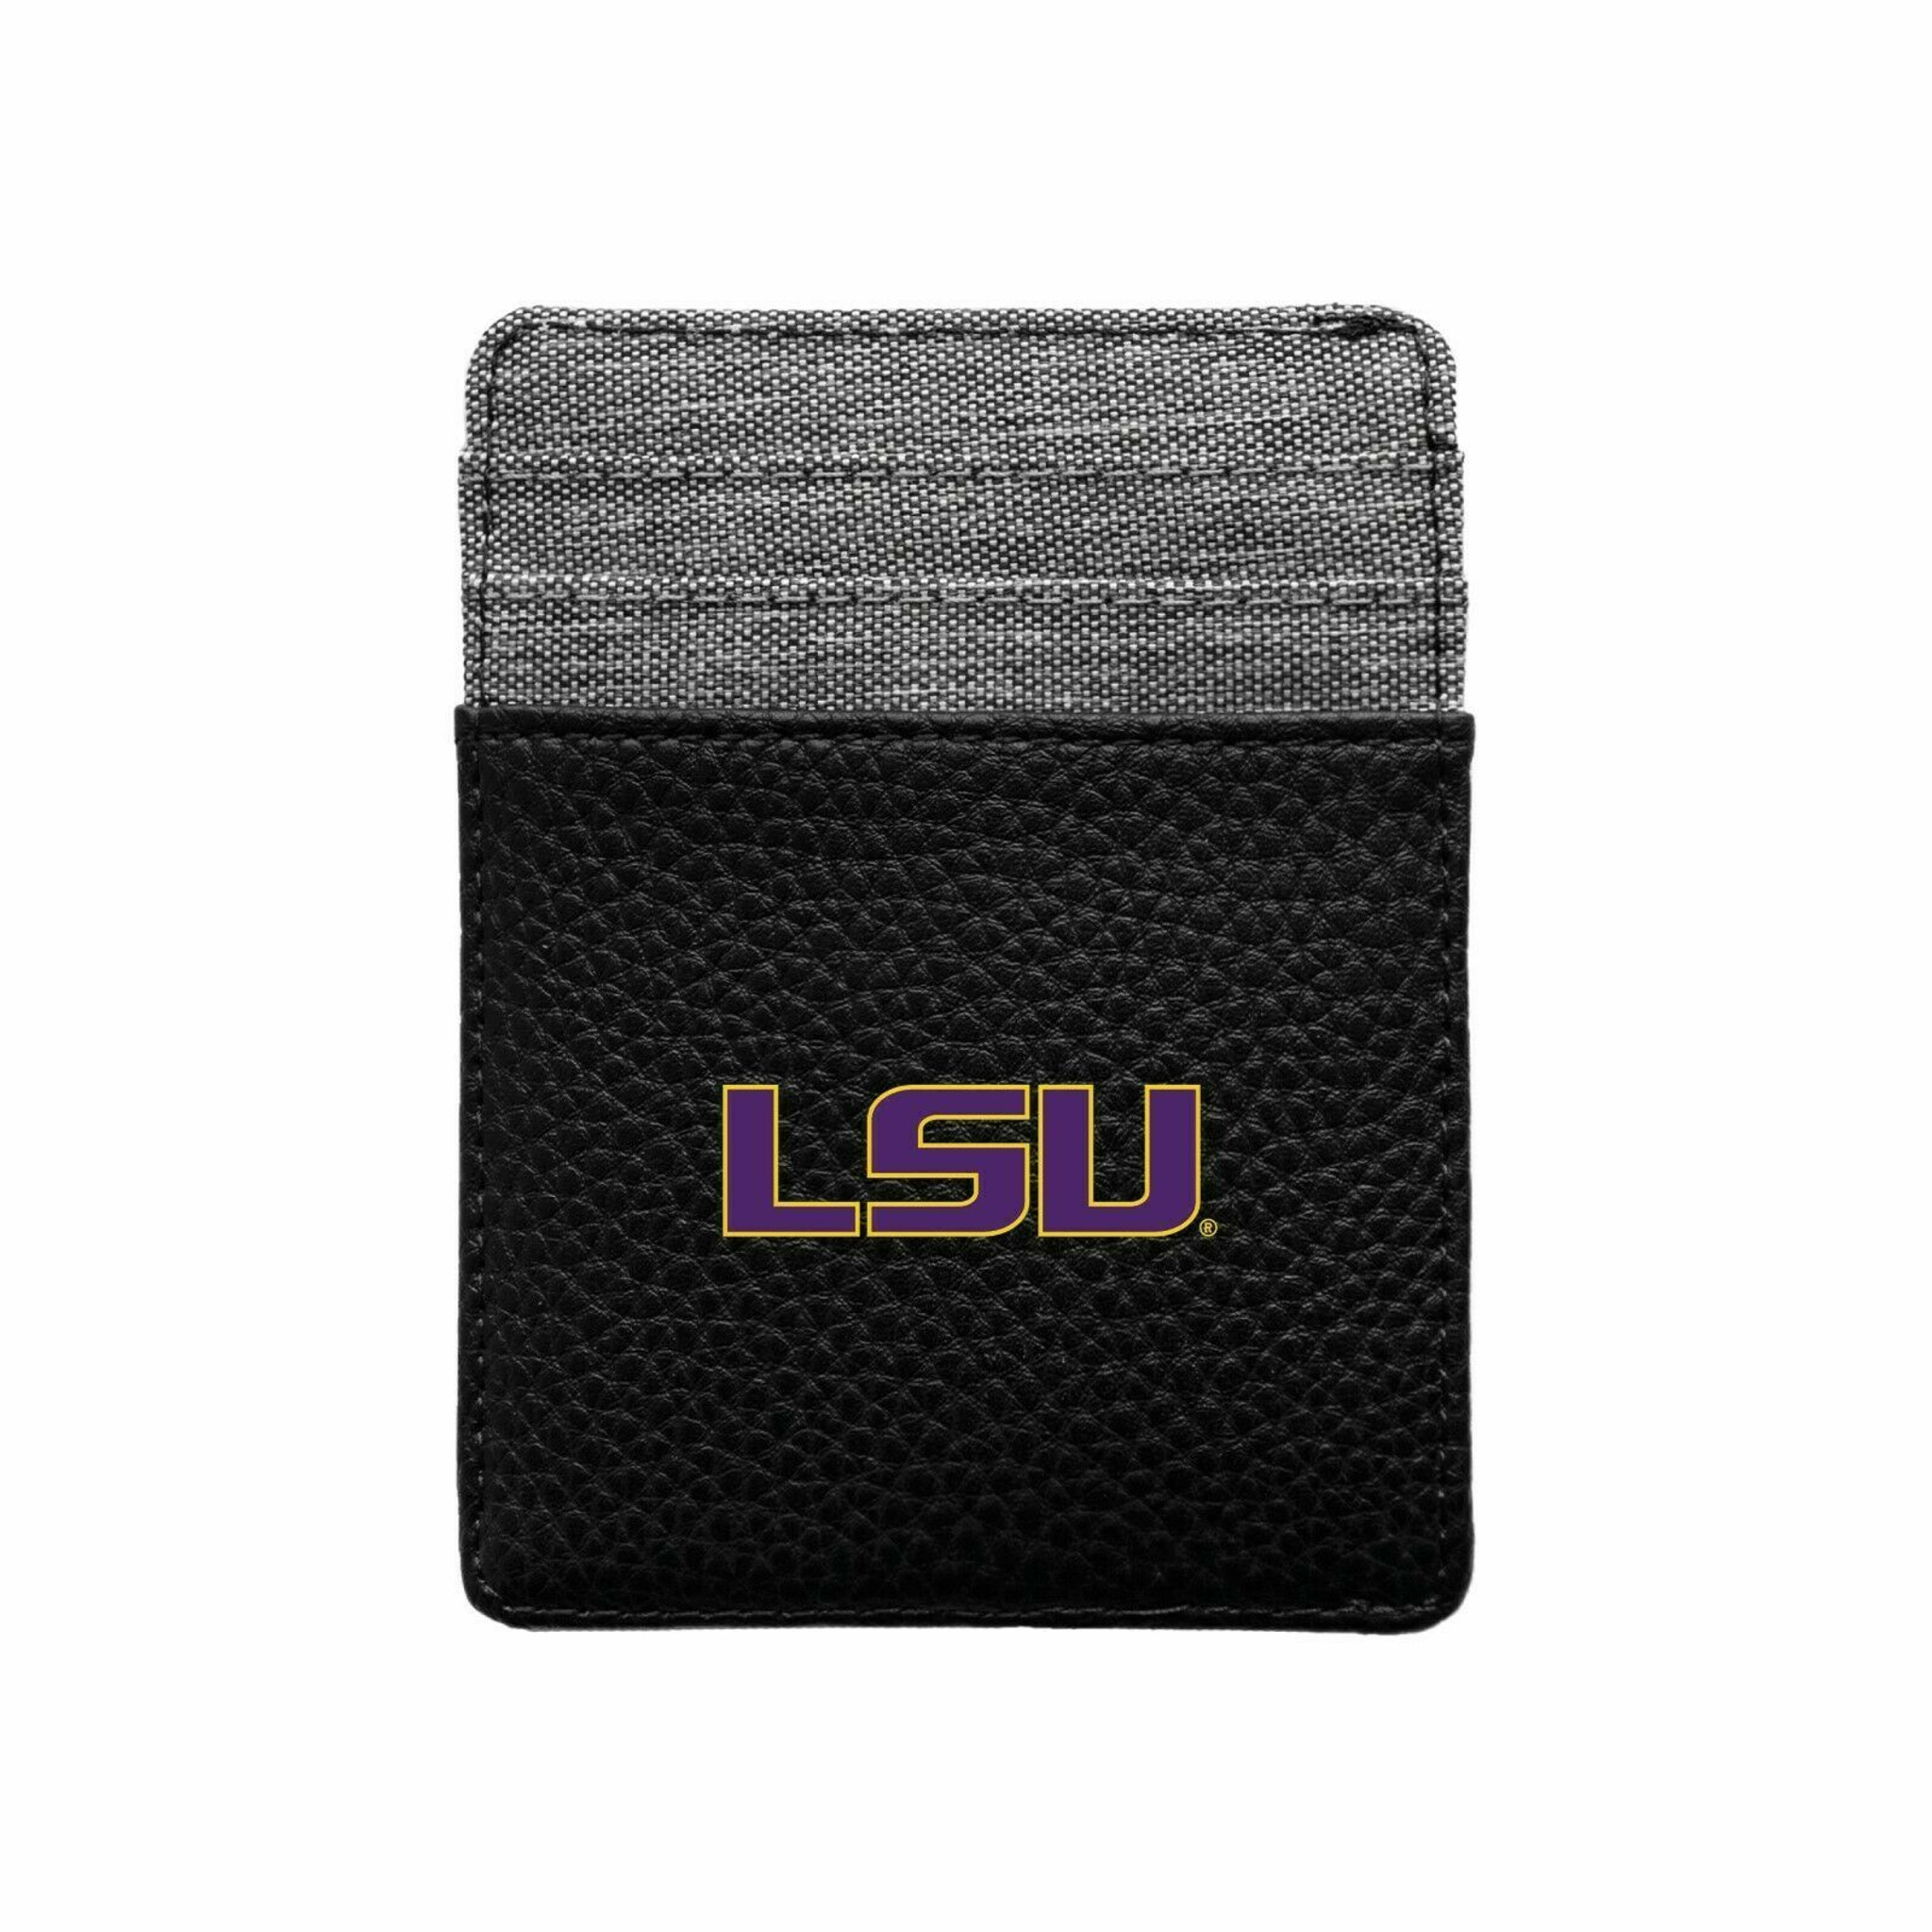 Officially Licensed NCAA Louisiana State Tigers Mini Organizer Wallet